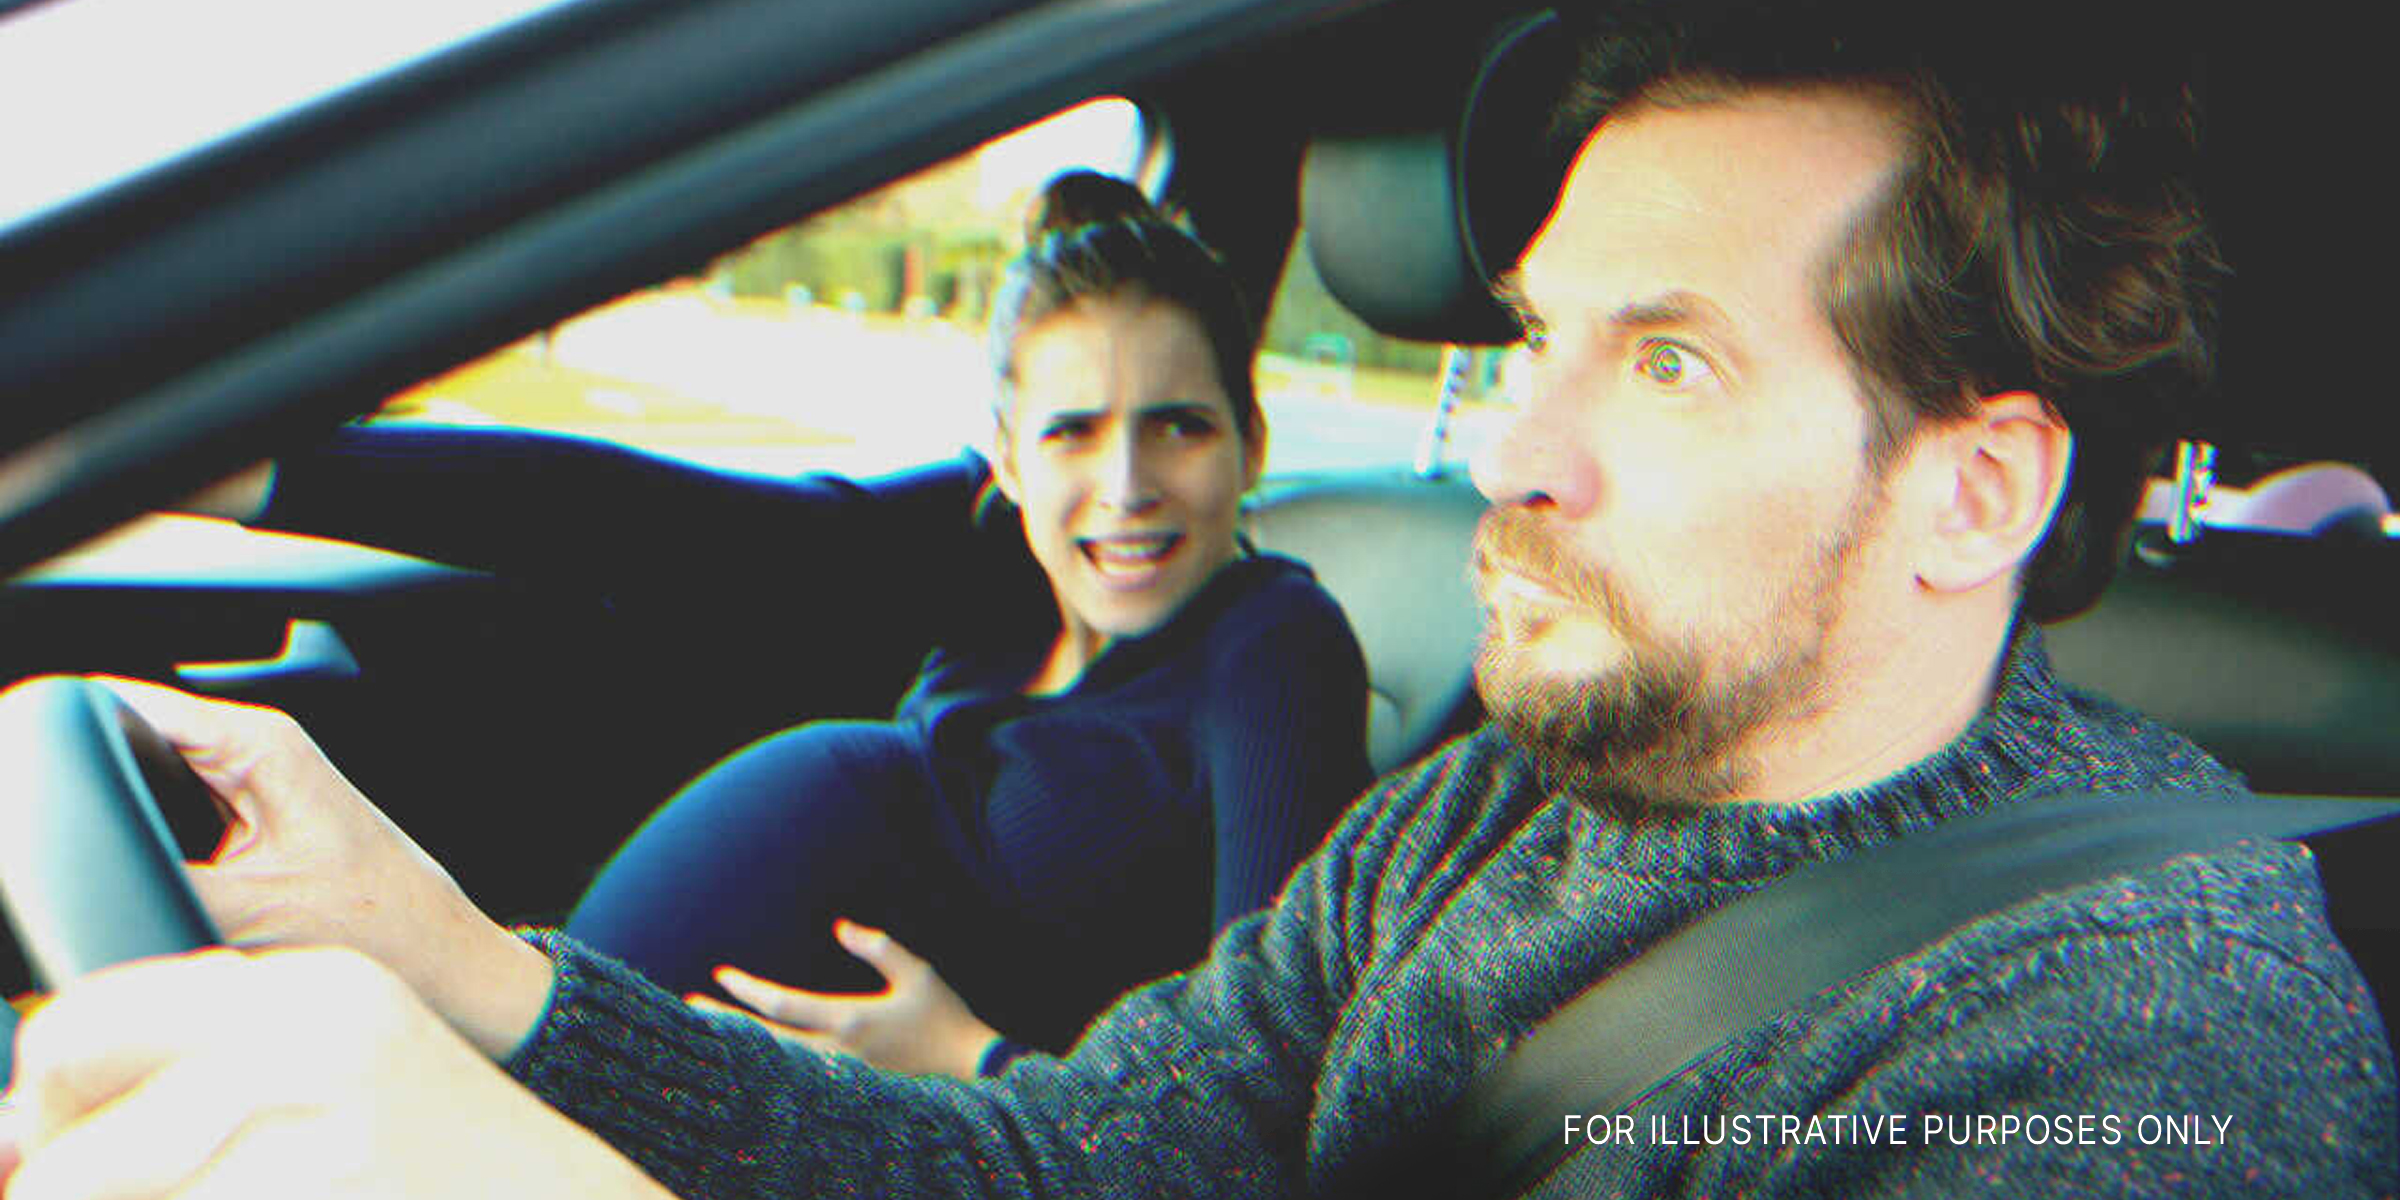 A man looking terrified while driving with a pregnant woman in labor | Source: Shutterstock